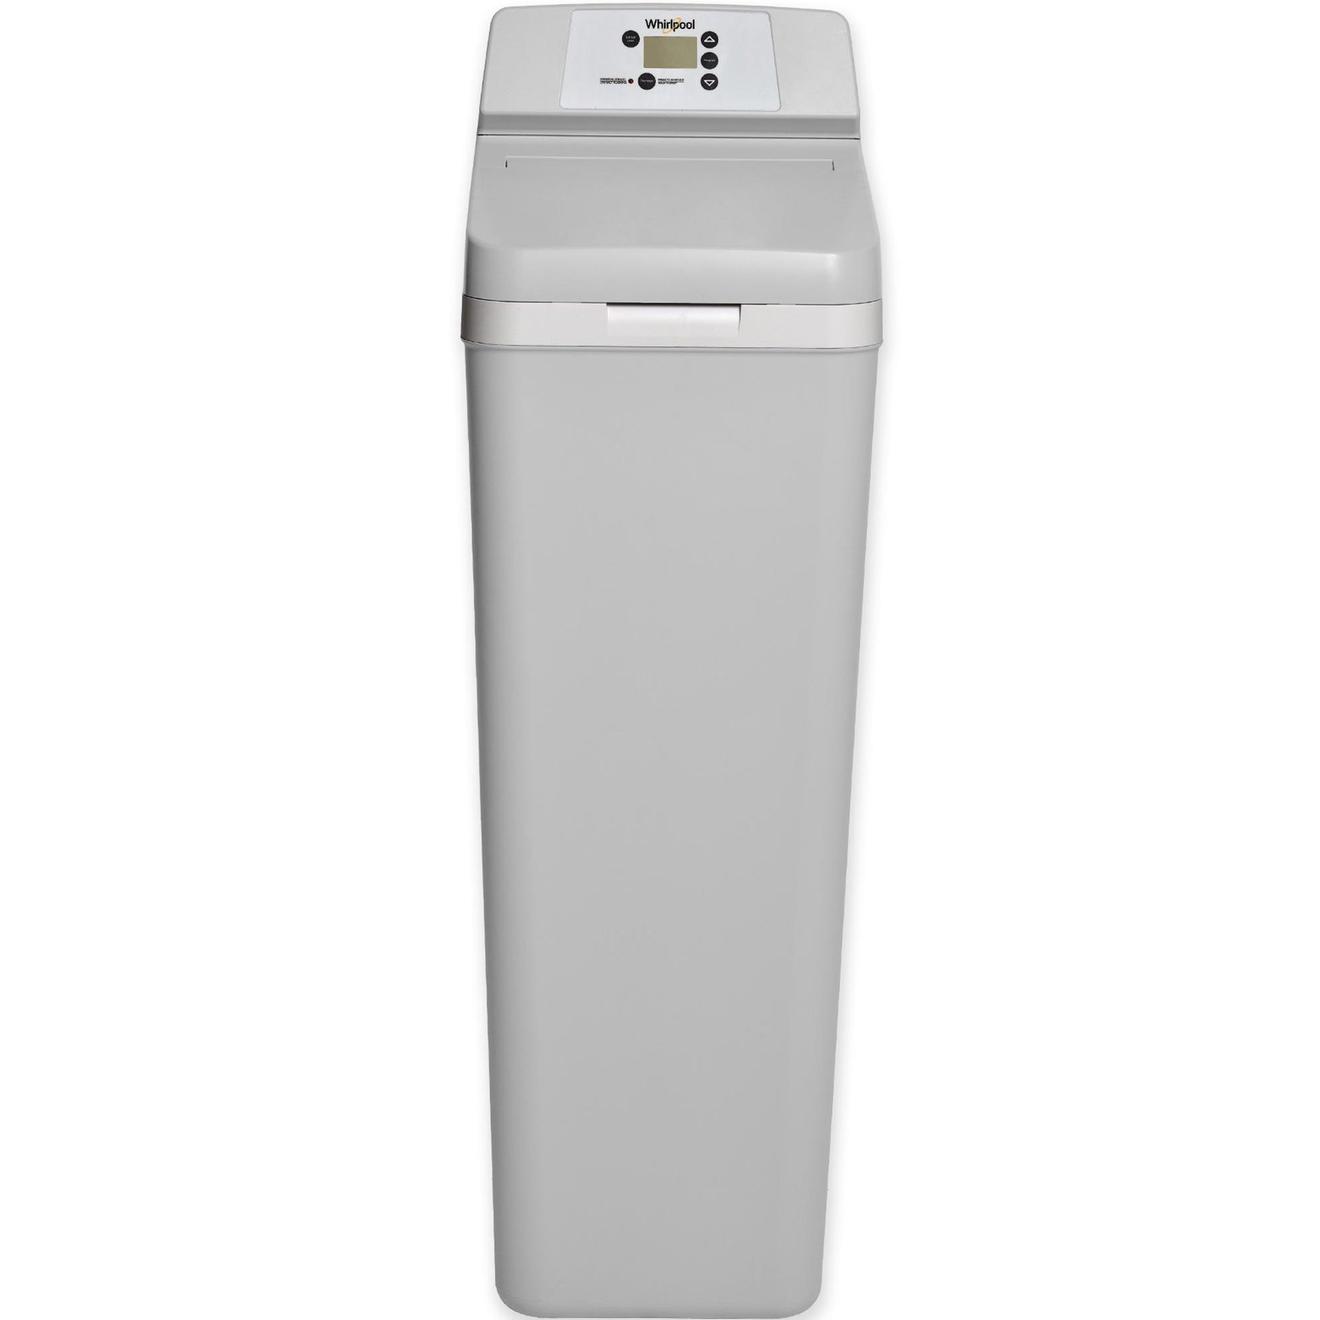 Whirlpool Water Softener offers at $724.98 in Trail Appliances